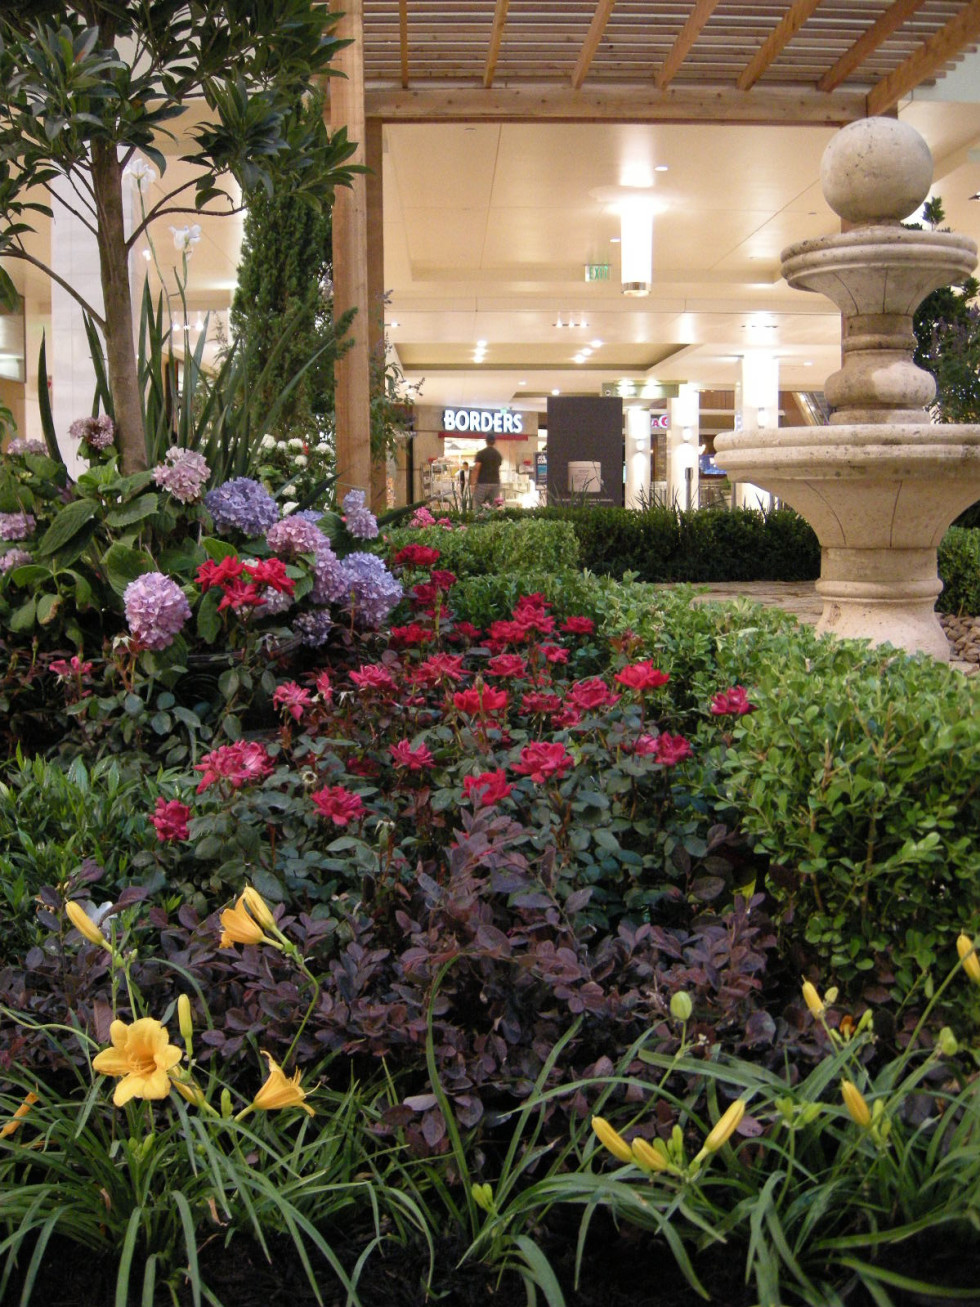 Spring's in bloom at The Galleria Primavera flowers take over the